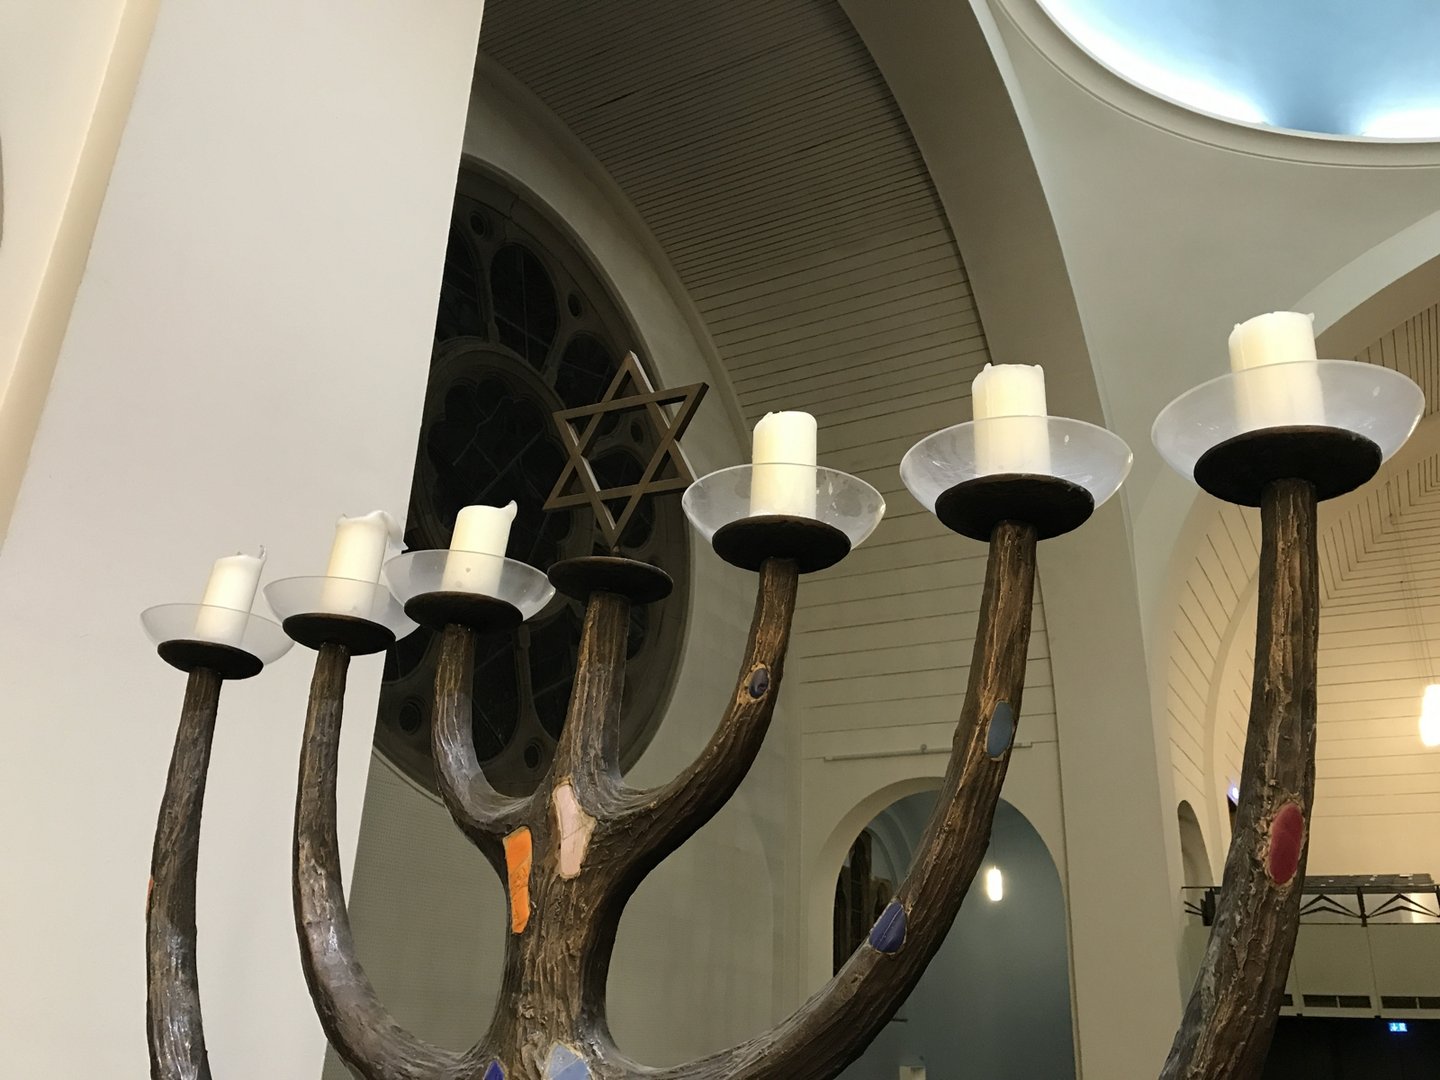 Big candle holder with six candles and a davids star in the middle (synagogue)